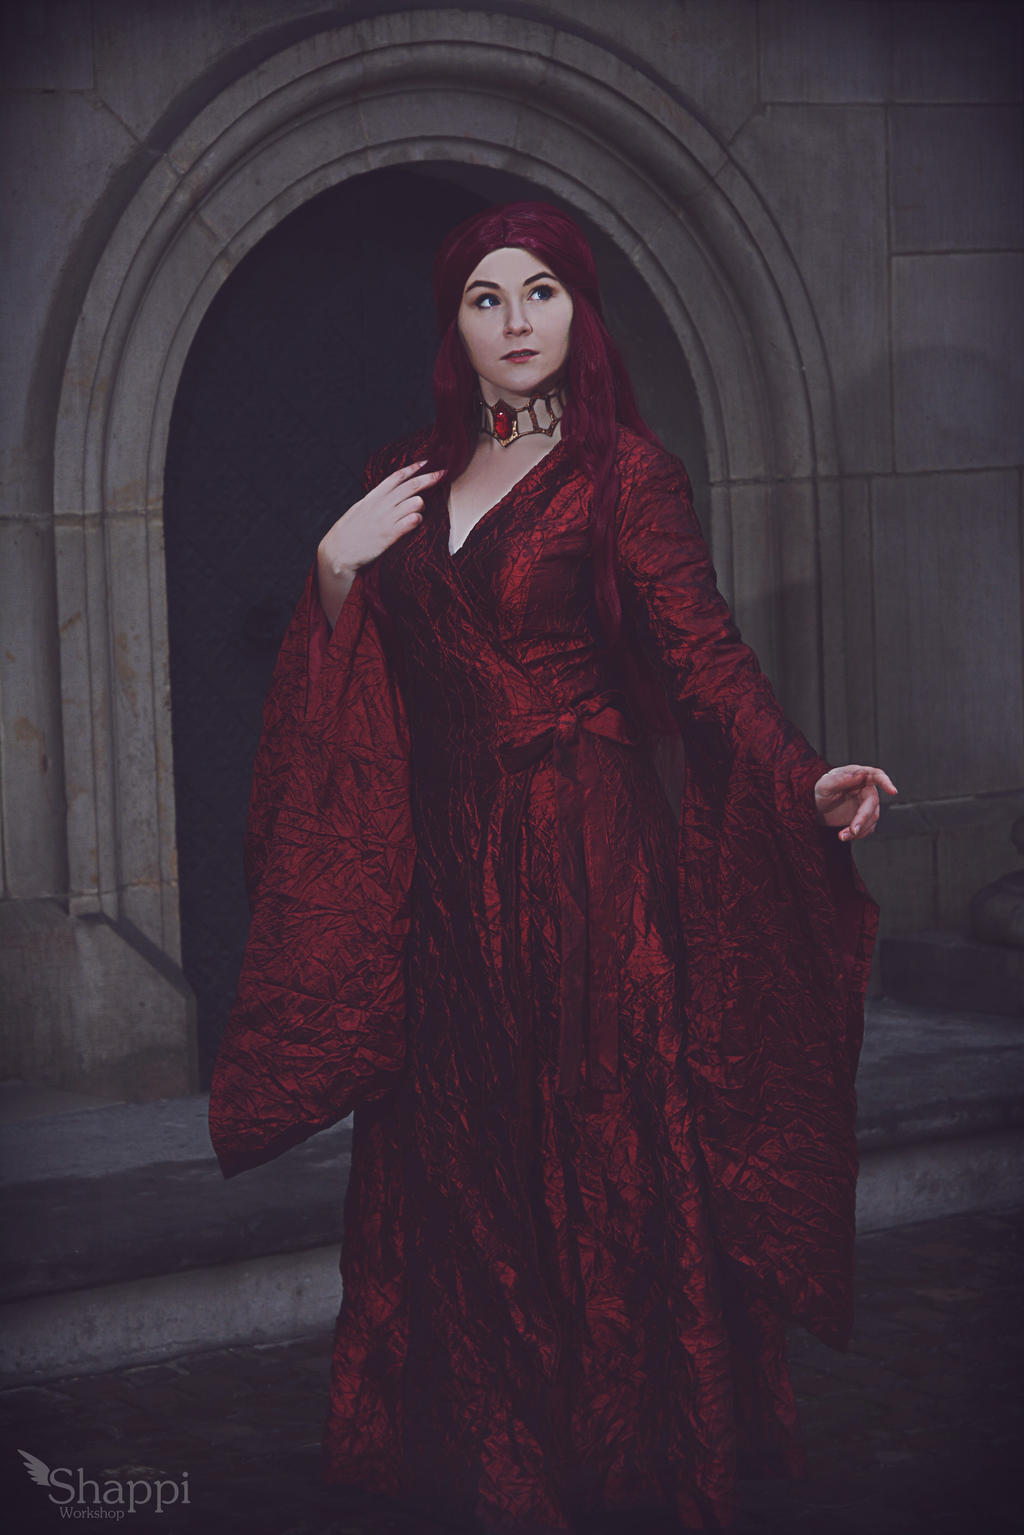 Red Woman Melisandre - Game of Thrones by Shappi on